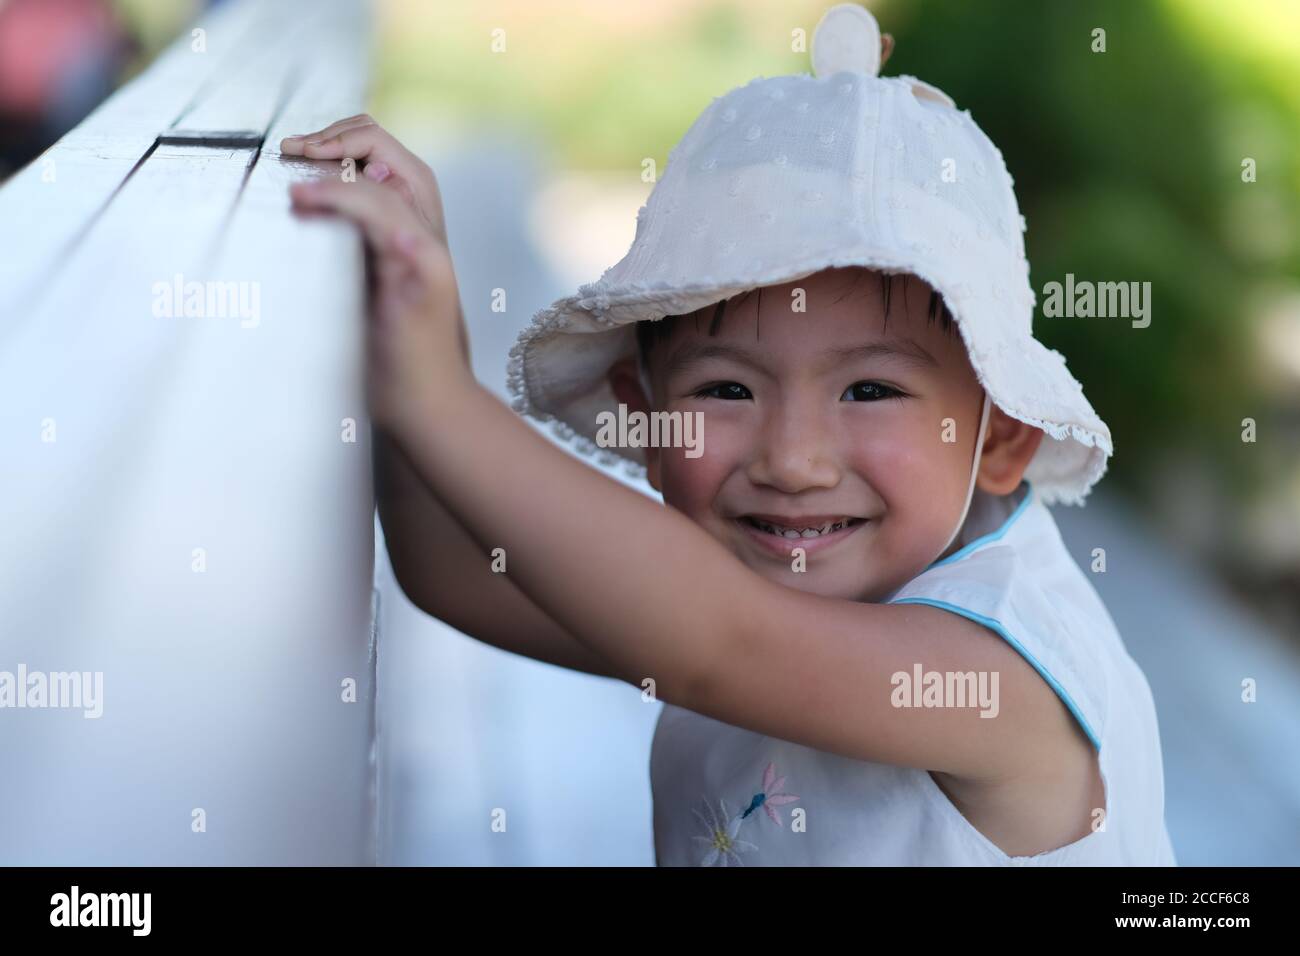 close up one Asian toddler in white hat, smiling and looking at camera Stock Photo